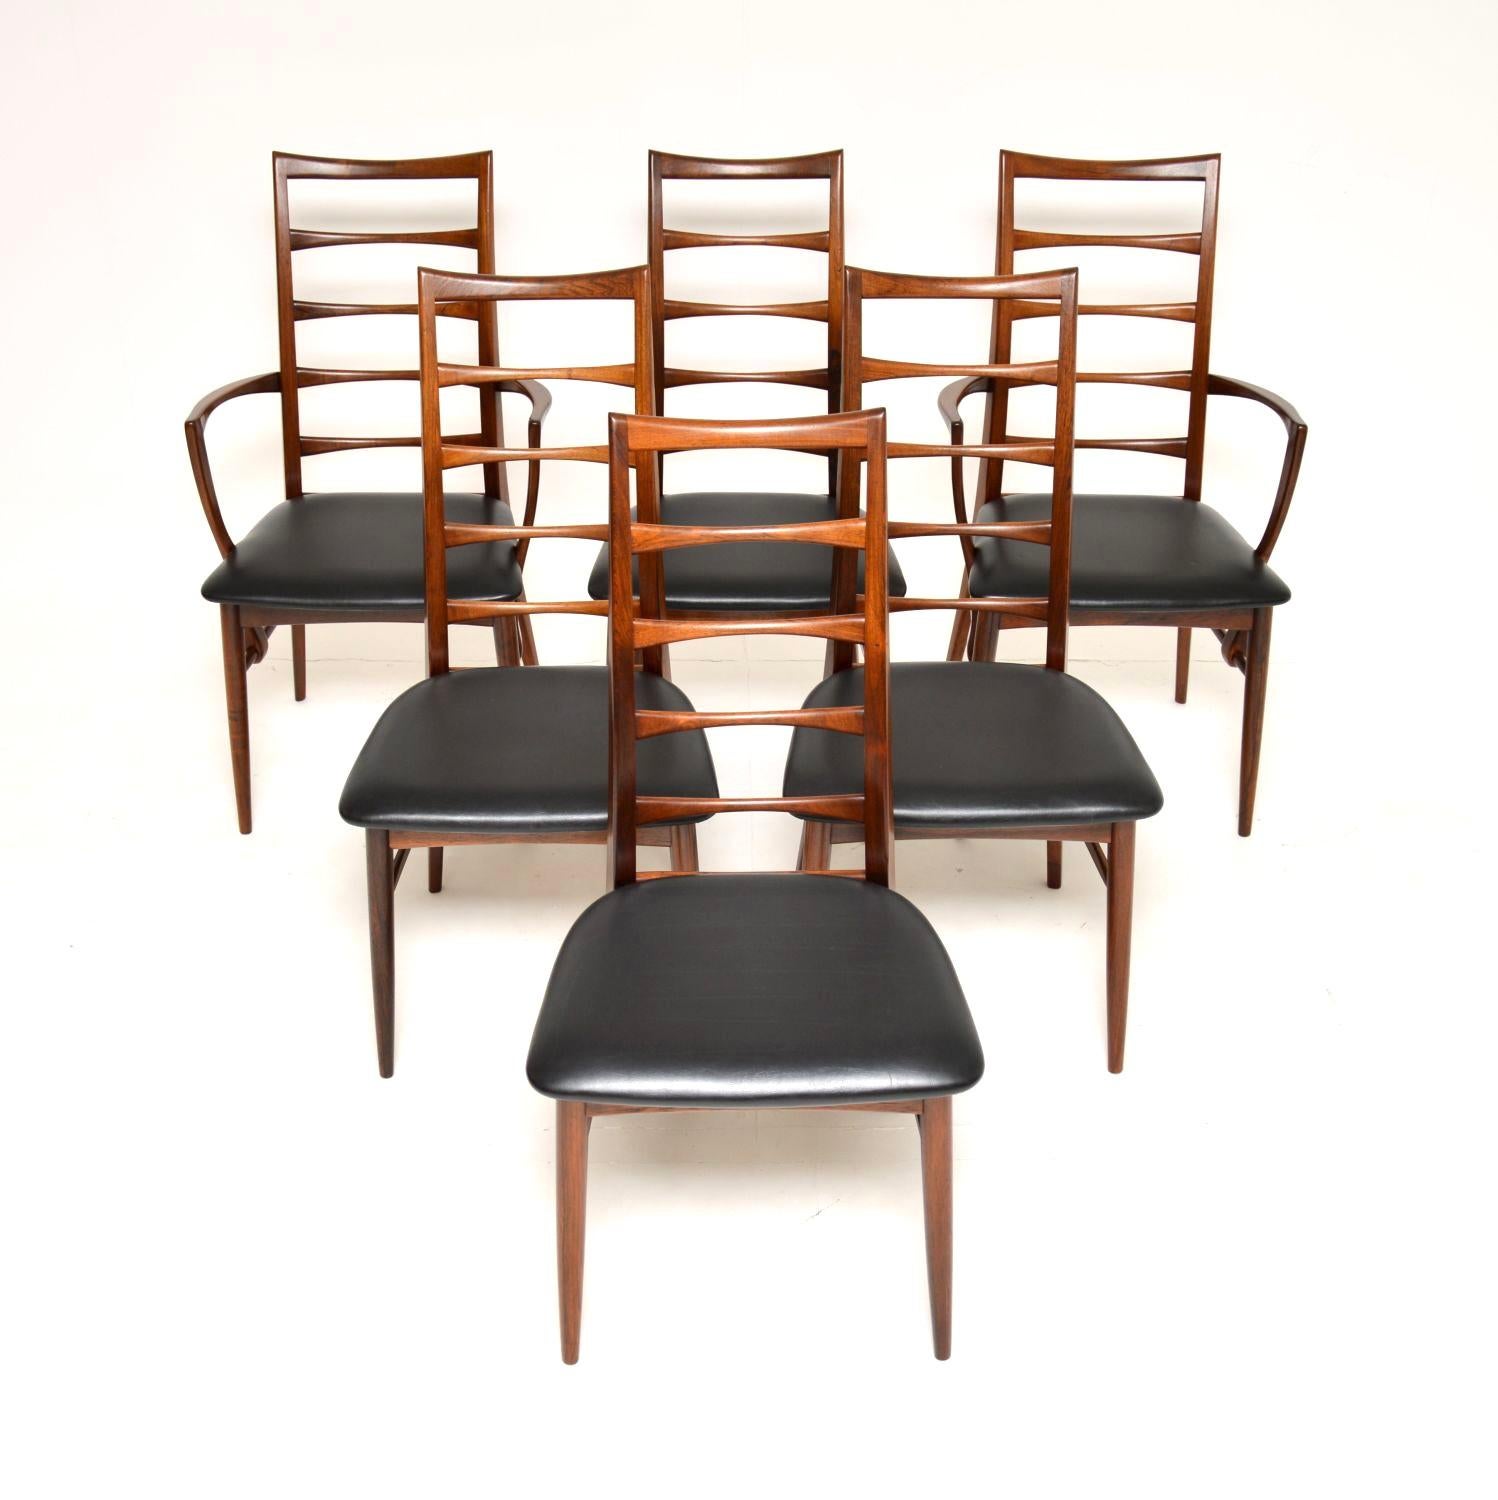 An extremely stylish and very rare set of six Danish dining chairs. They were designed by Niels Koefoed and made in Denmark by Koefoed Hornslet in the 1960’s. This model is called the ‘Lis’ chair.

The quality is outstanding, with sculptural and